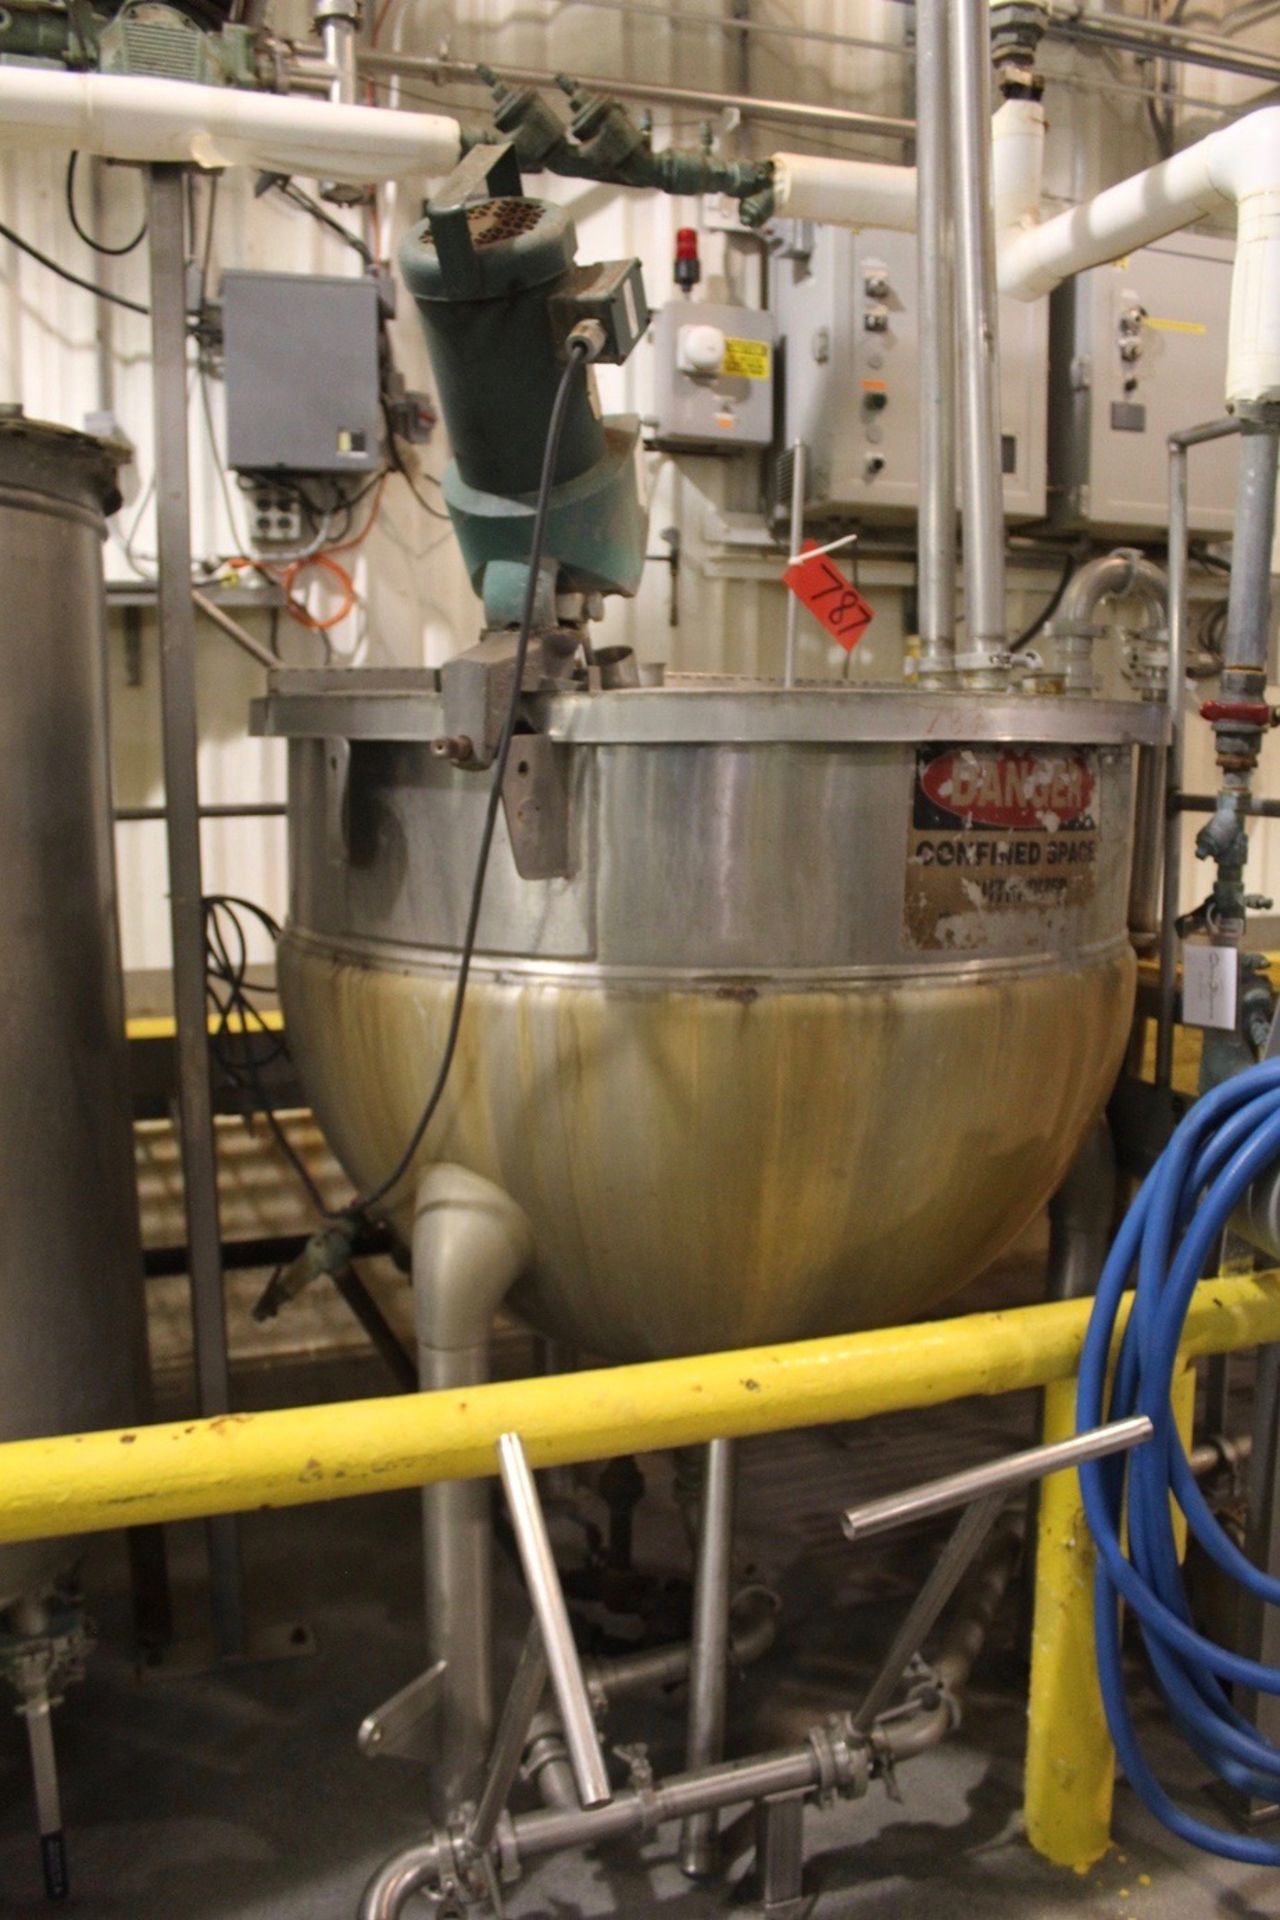 Hamilton Stainless Mixing Kettle, 200 Gal. Cap. | Rigging: $300